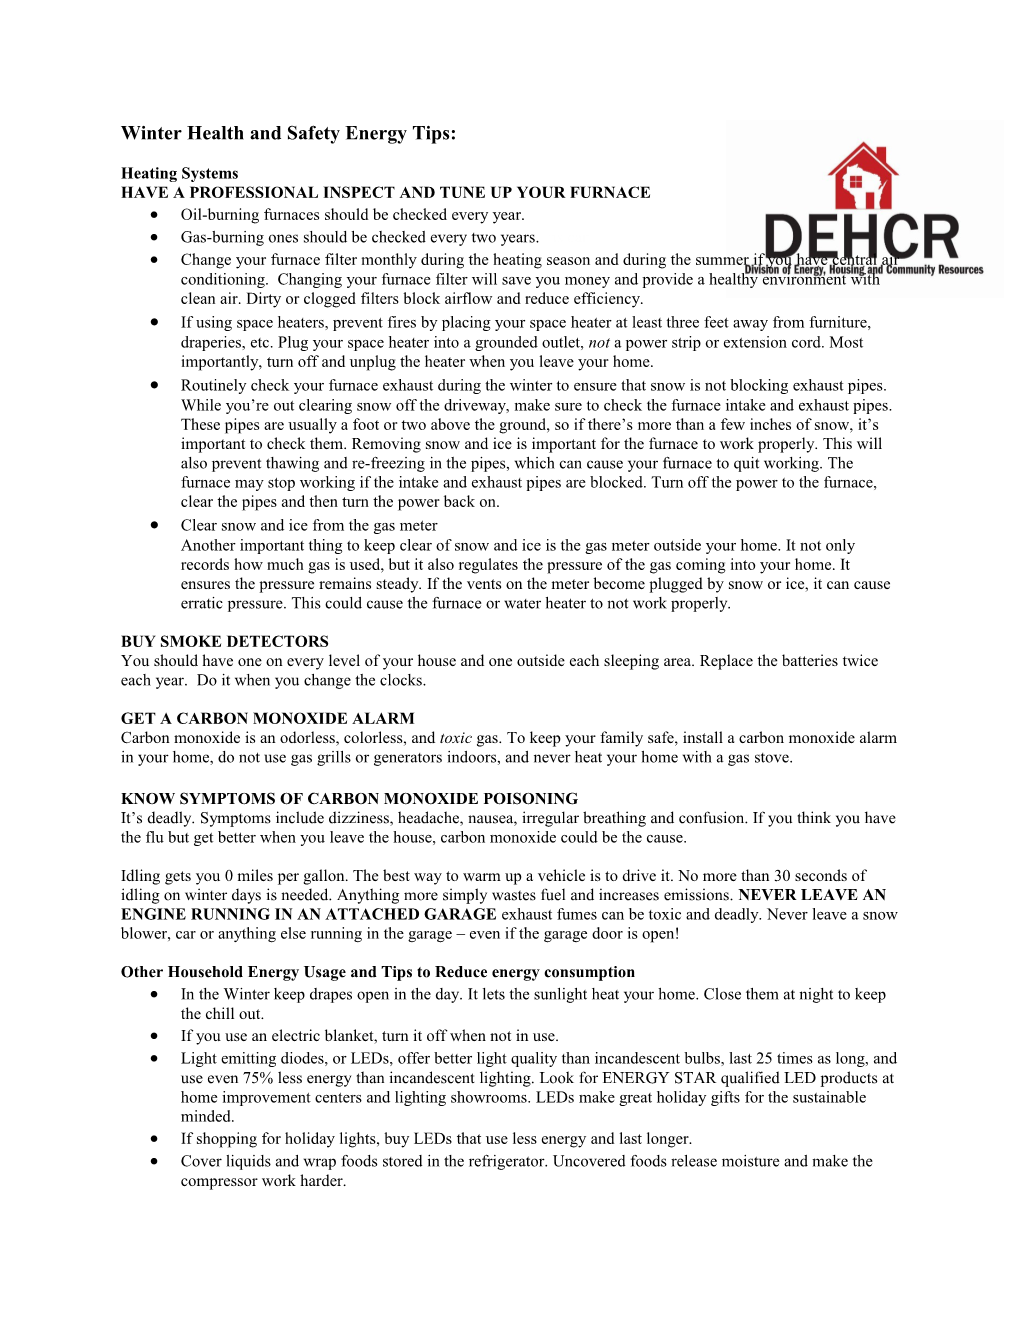 DEHCR Winter Health and Safety Energy Tips